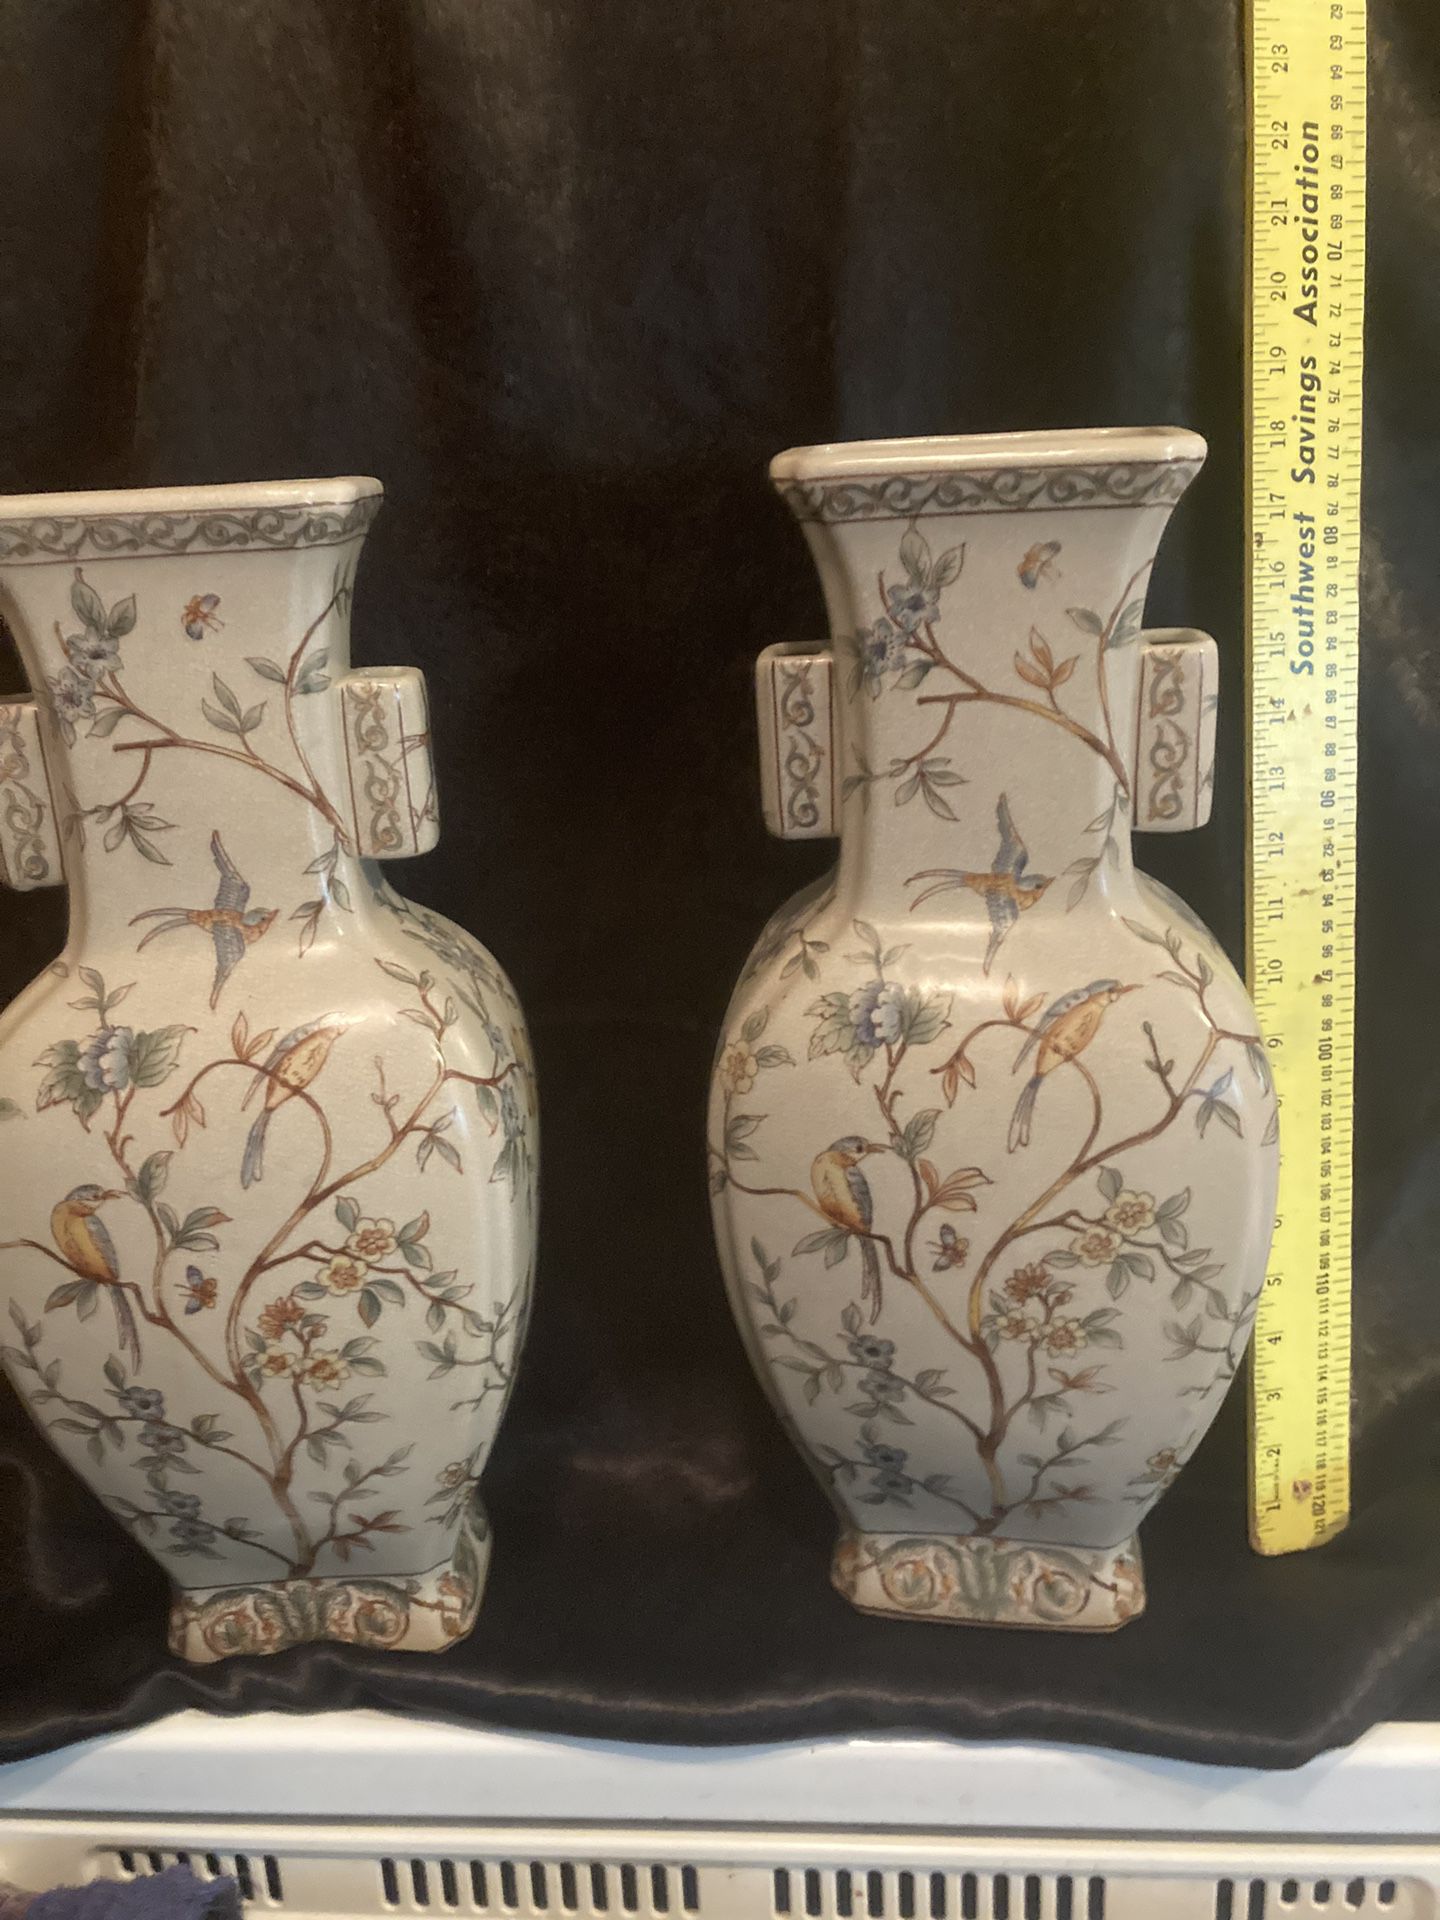 A Pair Of Antique Tall Vases 